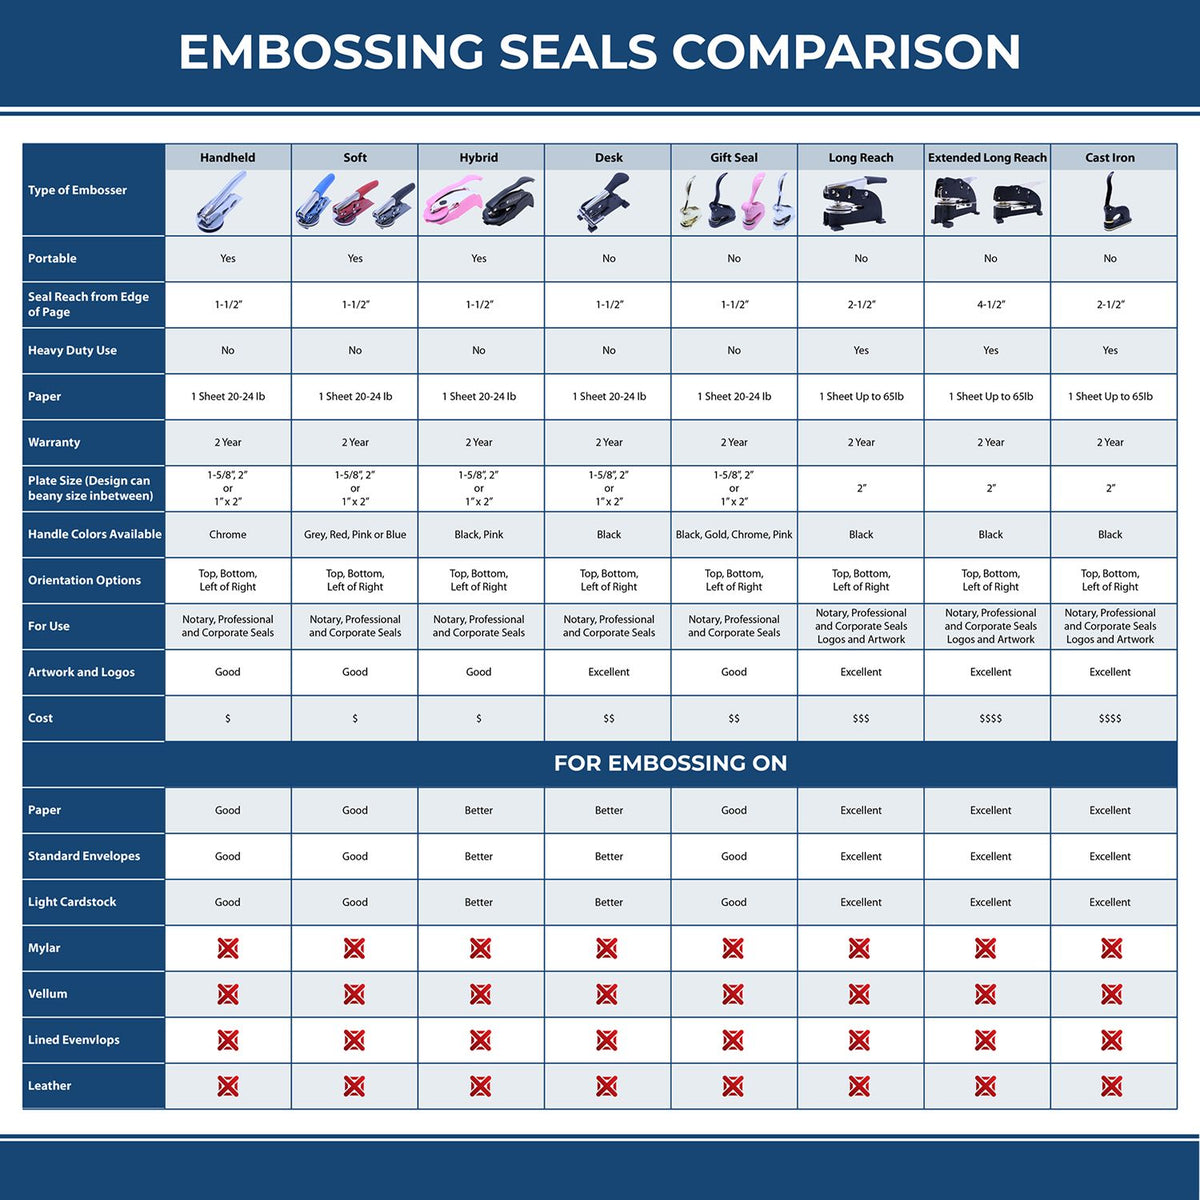 A comparison chart for the different types of mount models available for the Handheld Oklahoma Professional Geologist Embosser